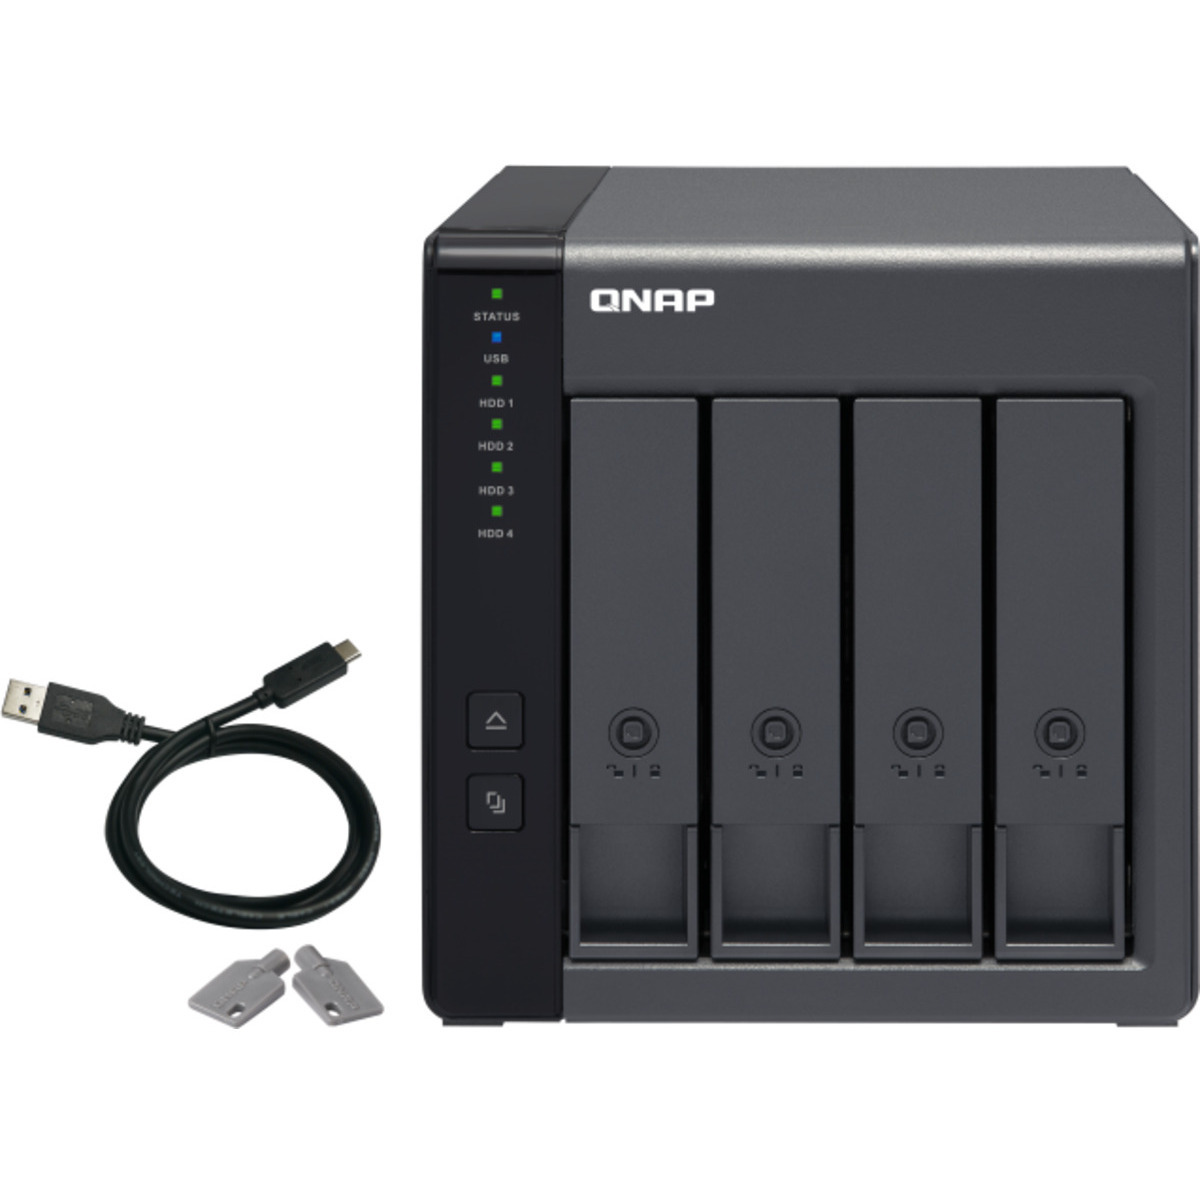 buy $1356 QNAP TR-004 External Expansion Drive 16tb Desktop Expansion Enclosure 4x4000gb Samsung 870 EVO MZ-77E4T0BAM 2.5 560/530MB/s SATA 6Gb/s SSD CONSUMER Class Drives Installed - Burn-In Tested - nas headquarters buy network attached storage server device das new raid-5 free shipping simply usa TR-004 External Expansion Drive